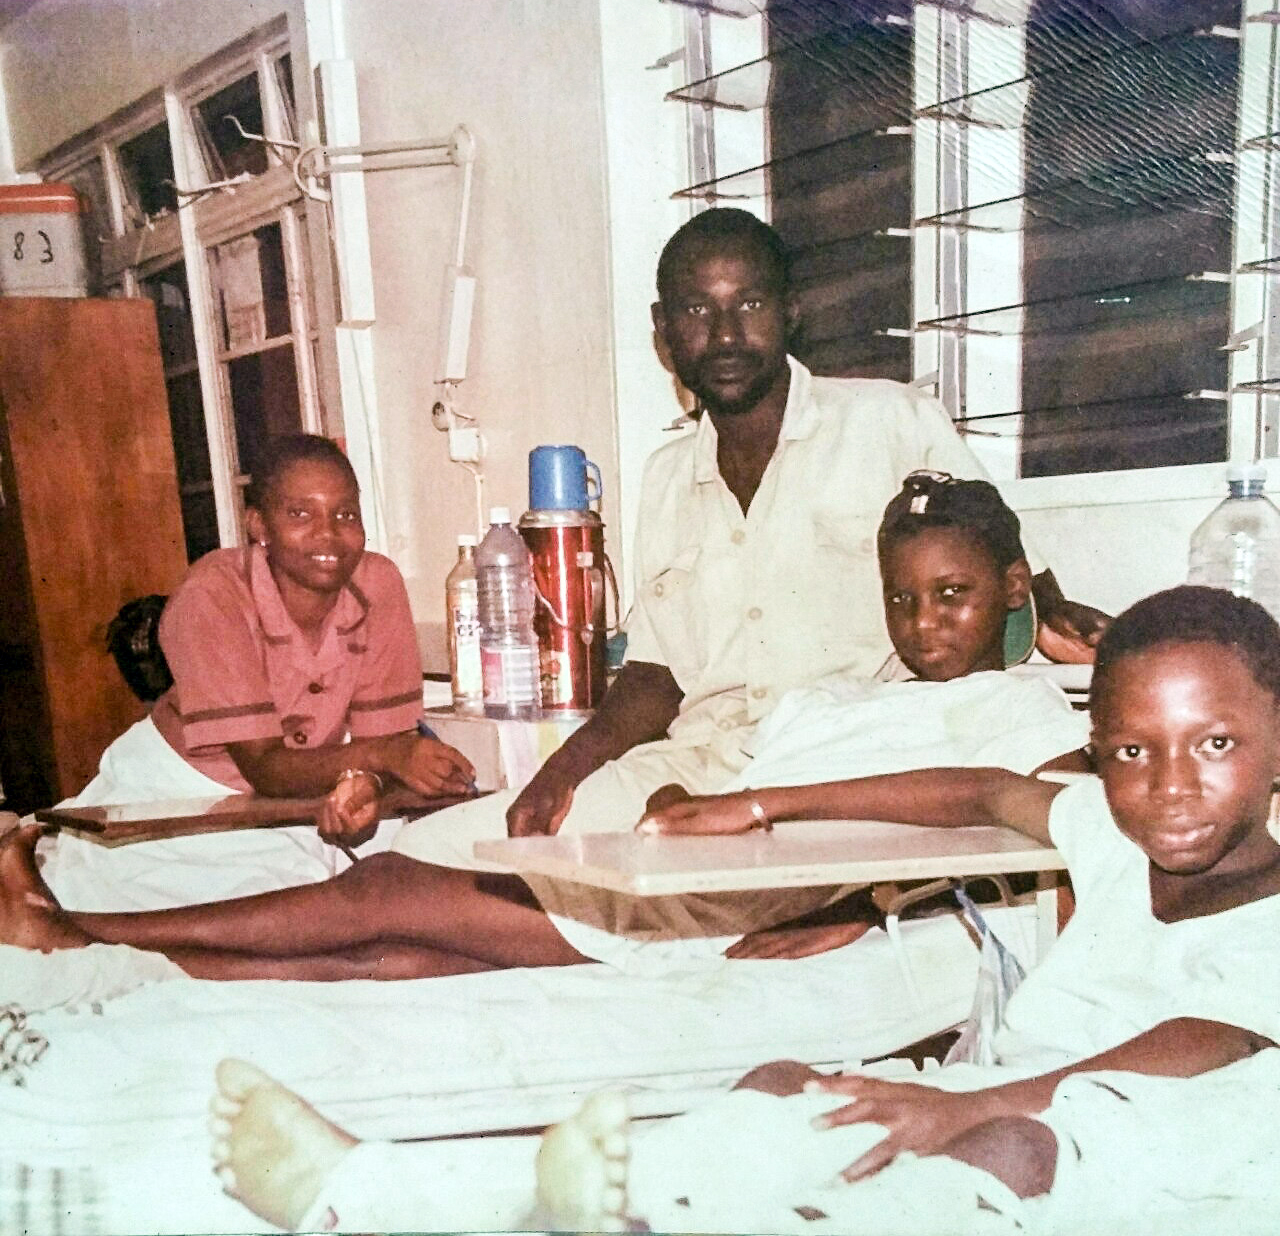 Ismail (second from left) at age 13 in a Gambia hospital recovering from a fractured femur, an injury that was to follow him into adulthood. At the far right is his nurse, and the hospital custodian. At the right is his bed neighbor.